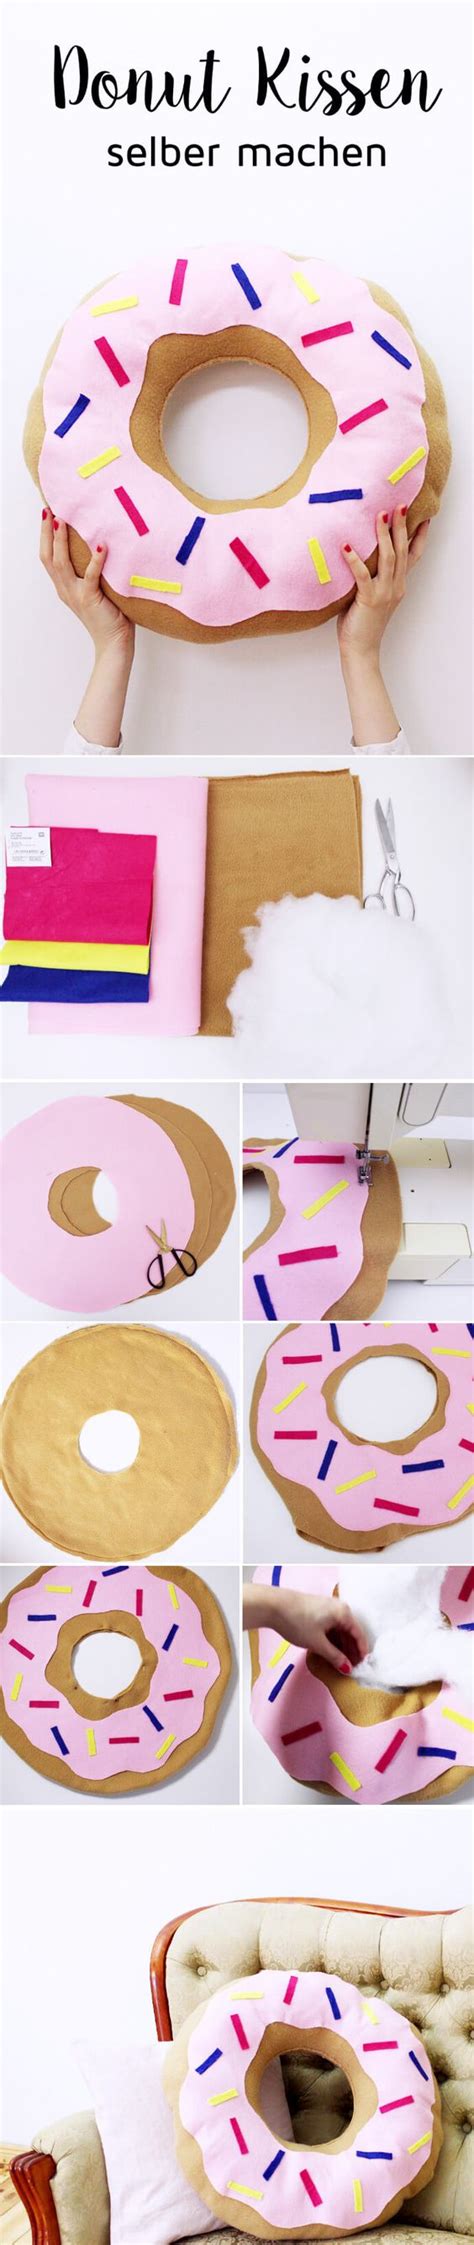 30 Easy Crafts To Make And Sell With Lots Of Diy